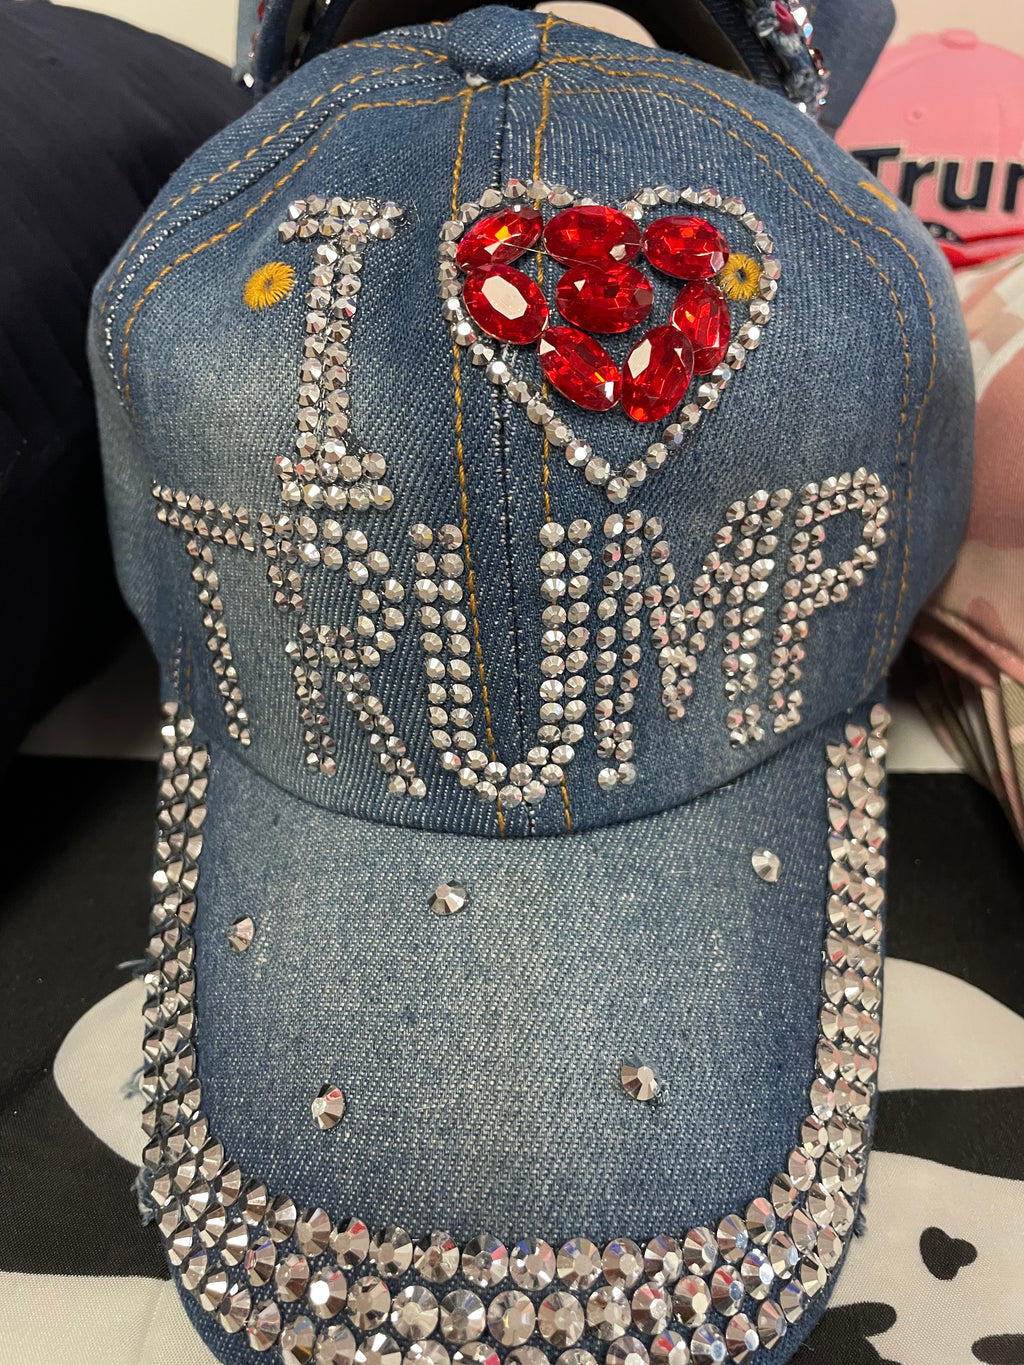 "I Love Trump" Bedazzled Hat